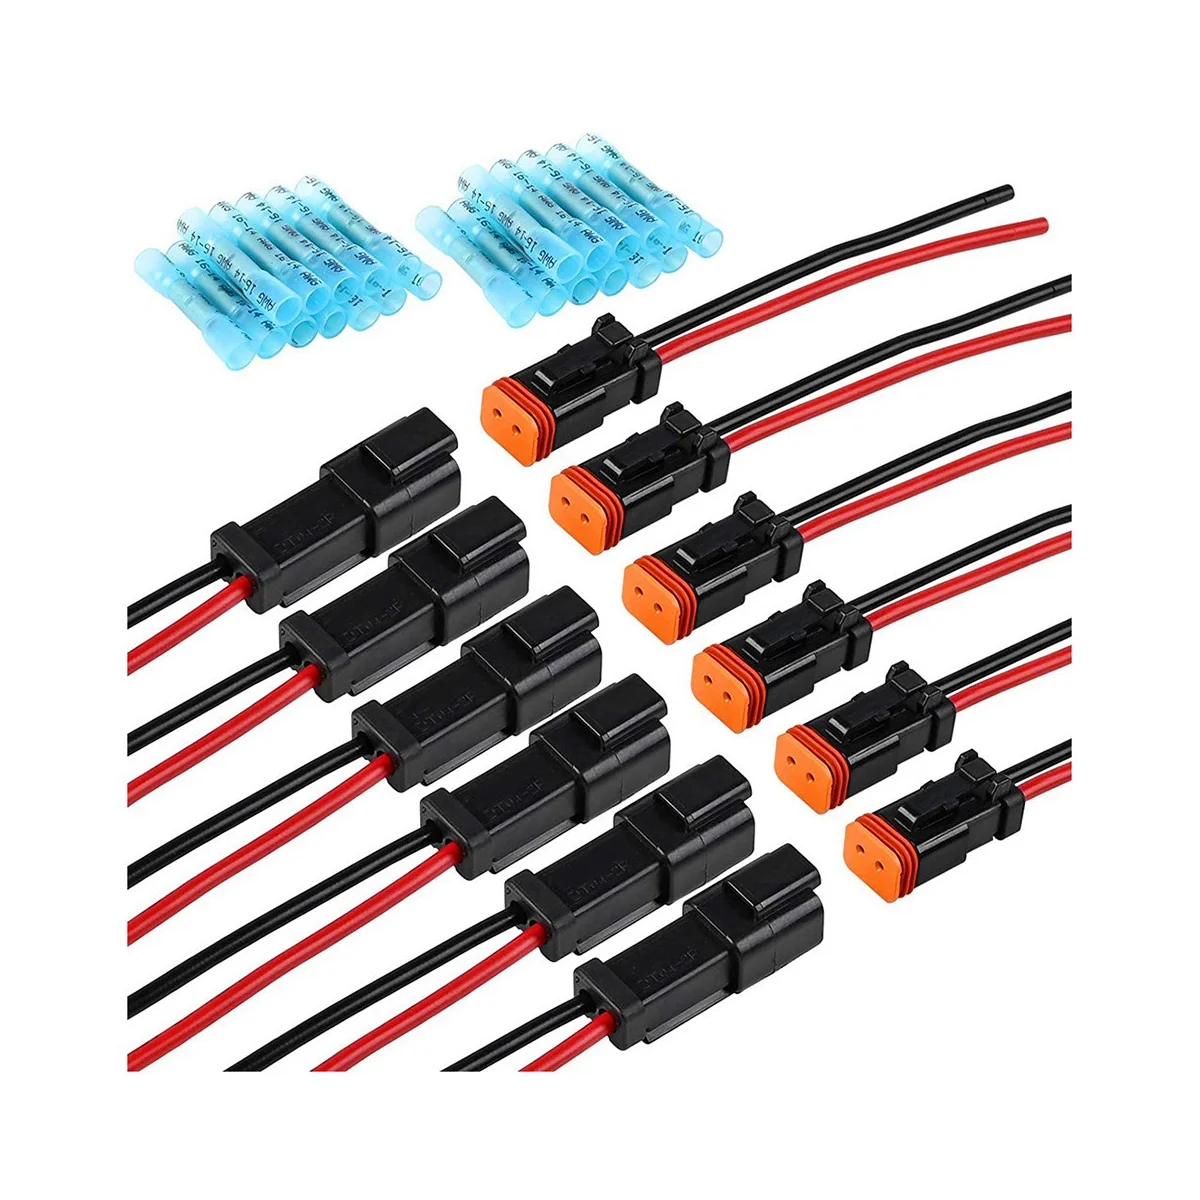 

6 Pair DT 2 Pin Pigtail Kit Male Female Connector Adapter Socket Wiring Harness for LED Work Light Bar Accessories